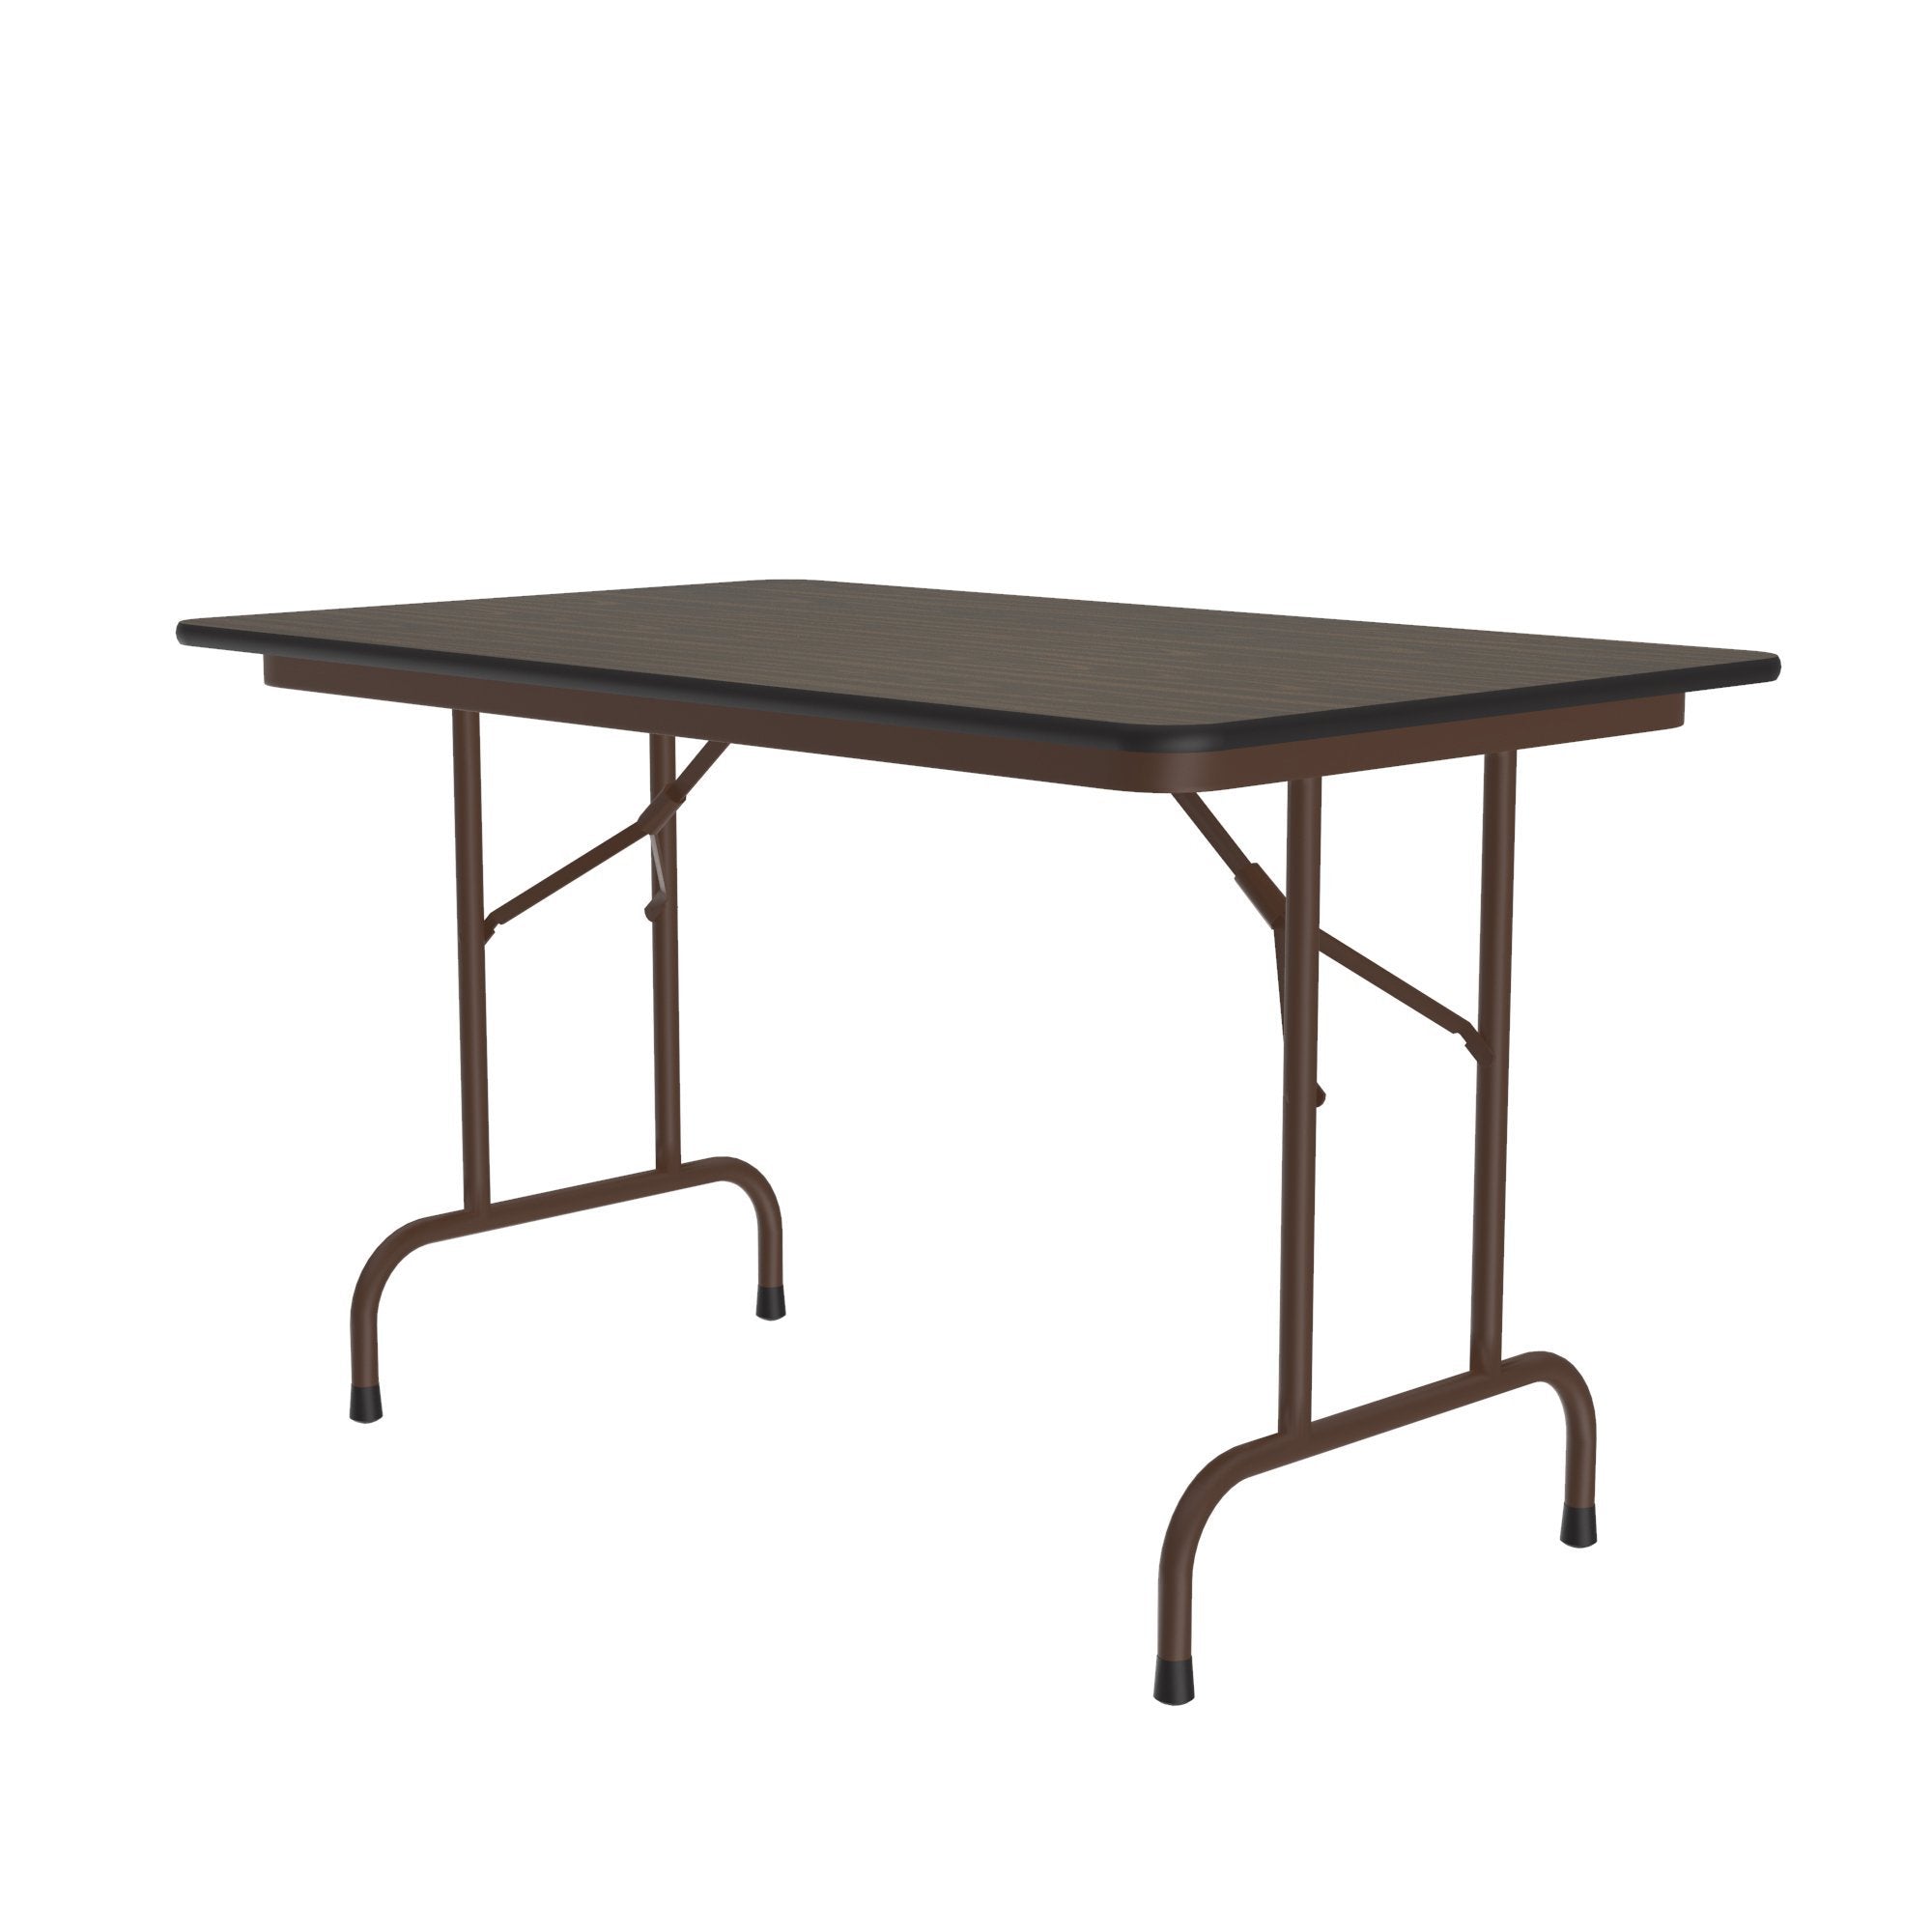 KFI Powered Horseshoe Table - For - Table TopHigh Pressure Laminate (HPL)  Rectangle, Teak Top - Column Leg Base - 84 Table Top Length x 42 Table  Top Width - Assembly Required - 1 Each - OFFICE PROS